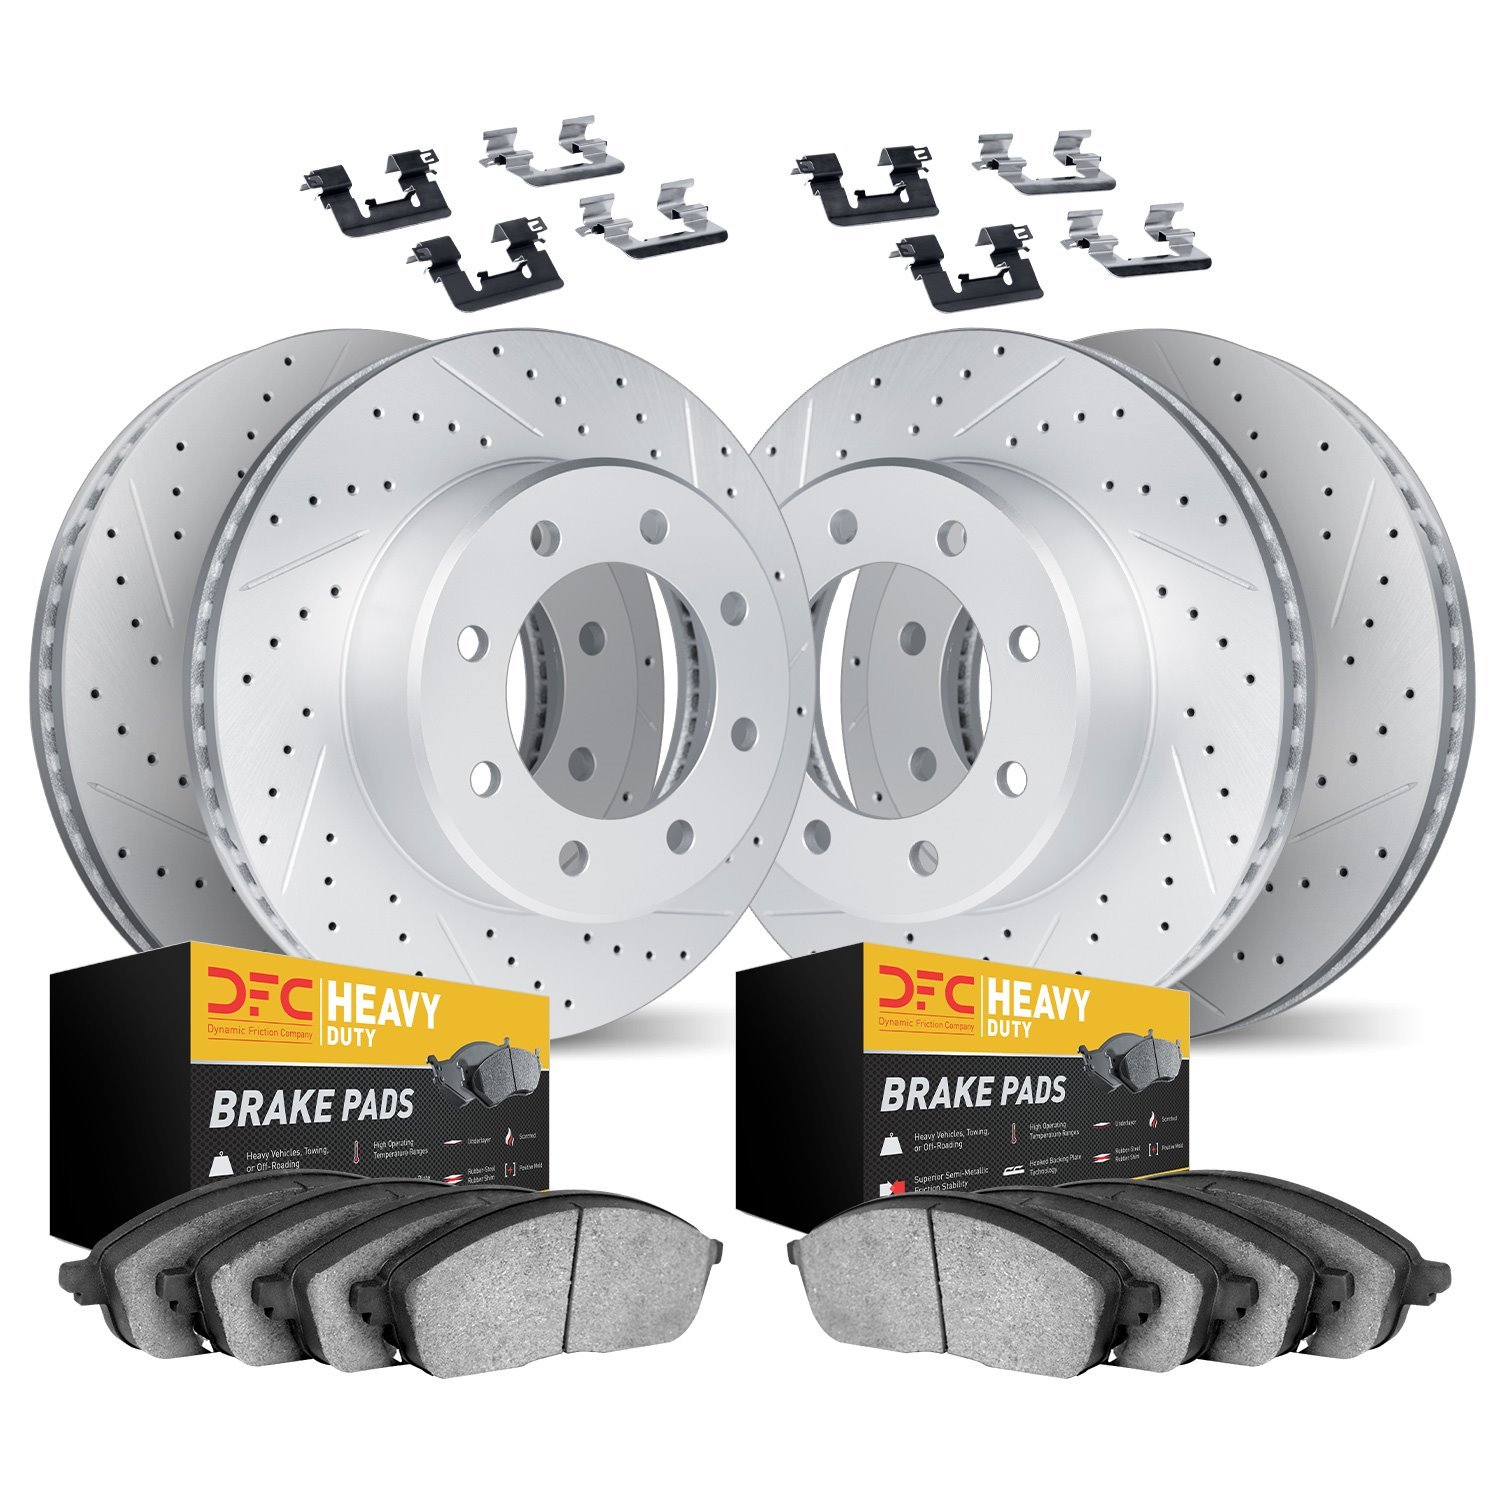 2214-99088 Geoperformance Drilled/Slotted Rotors w/Heavy-Duty Pads Kit & Hardware, 2006-2010 Ford/Lincoln/Mercury/Mazda, Positio